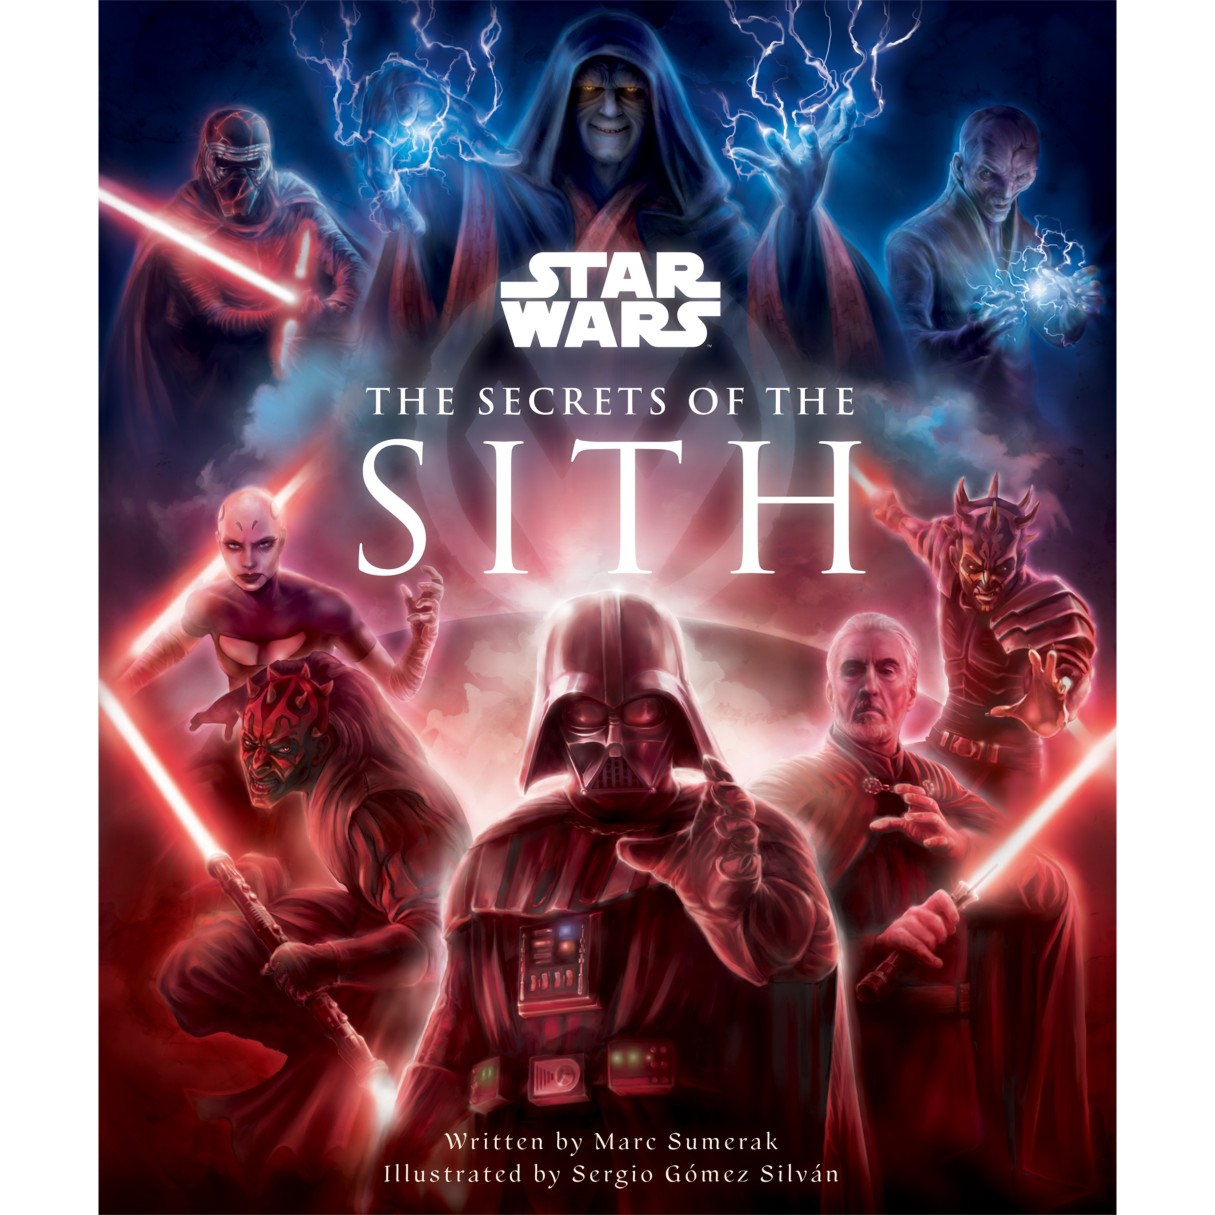 Star Wars: The Secrets of the Sith Book